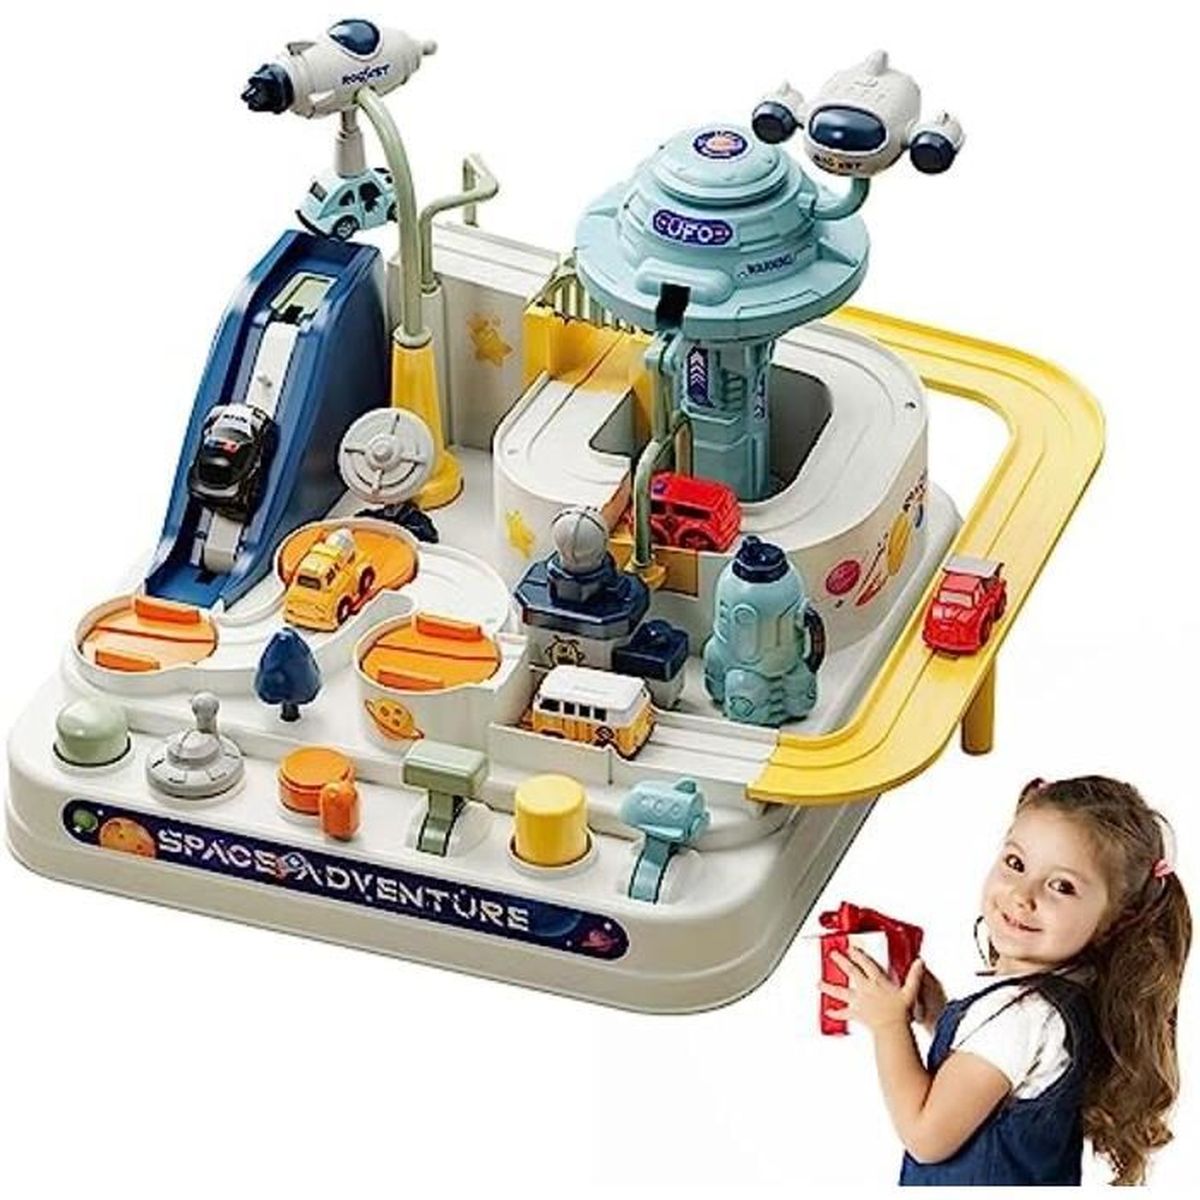 Jouets fille 8 10 ans - Cdiscount